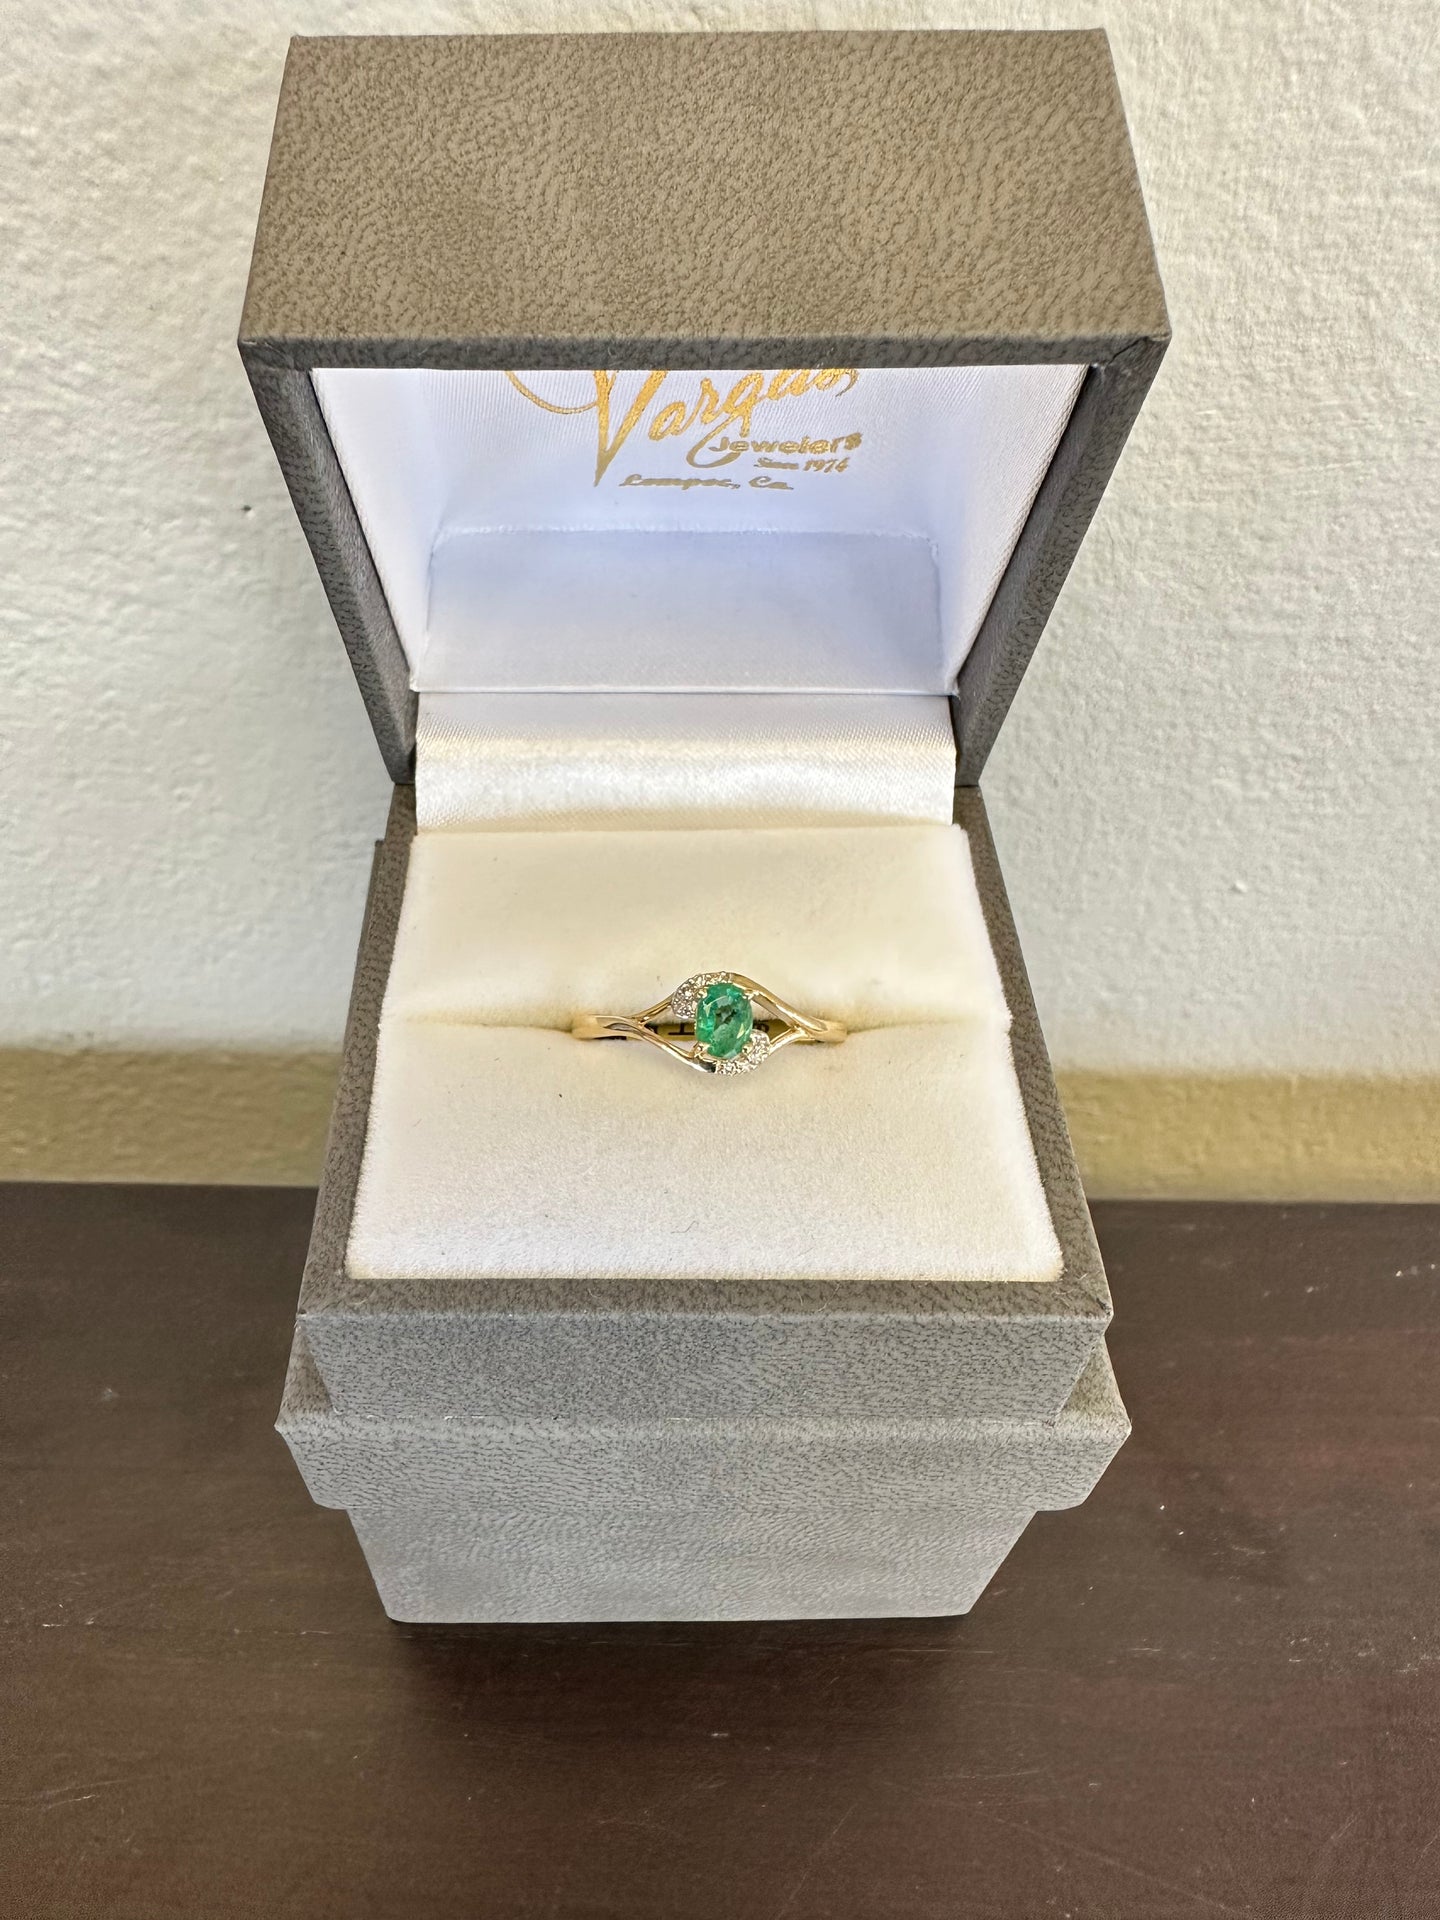 Oval Emerald and Diamond Ring